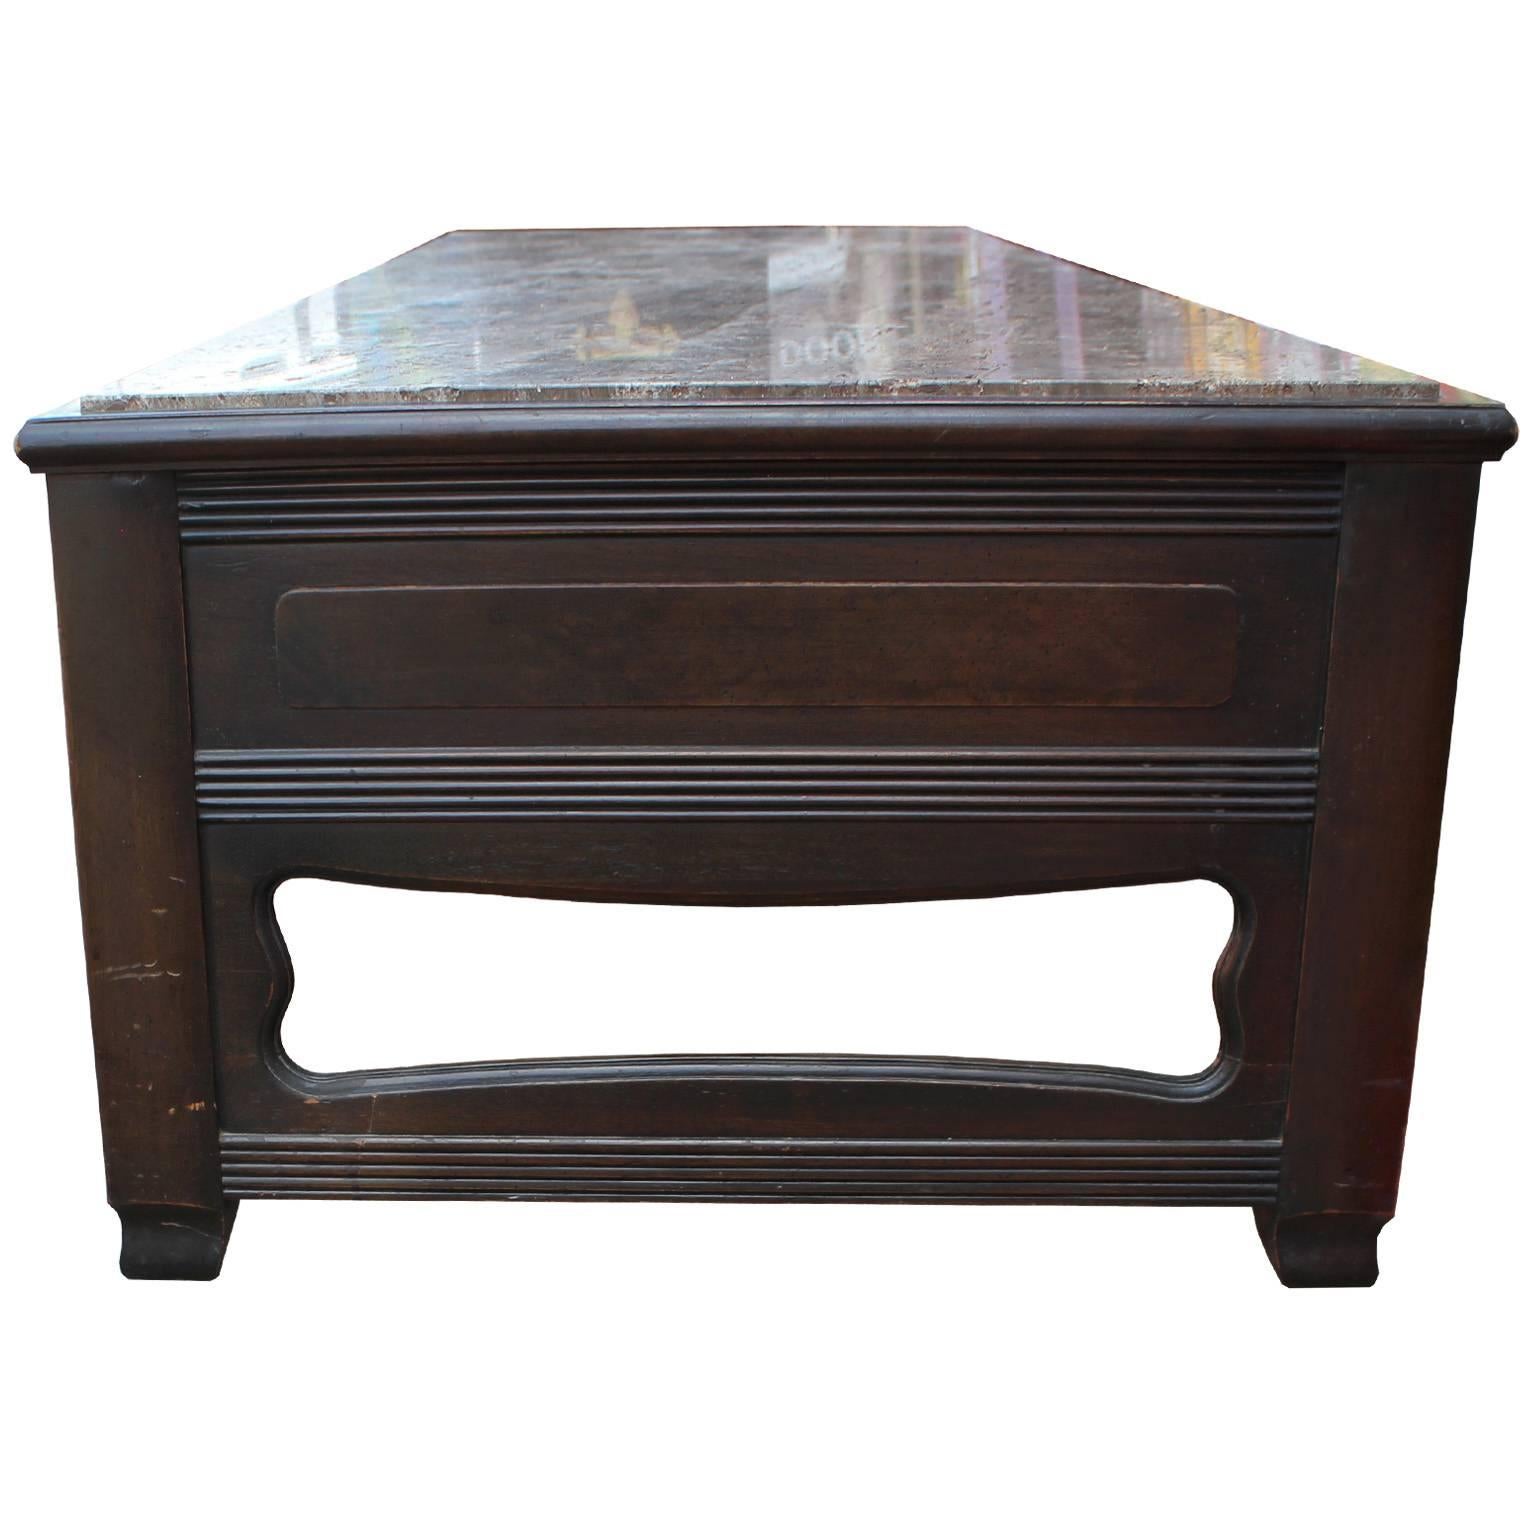 American Modern Widdicomb Brass and Marble Topped Coffee Table with Walnut Base